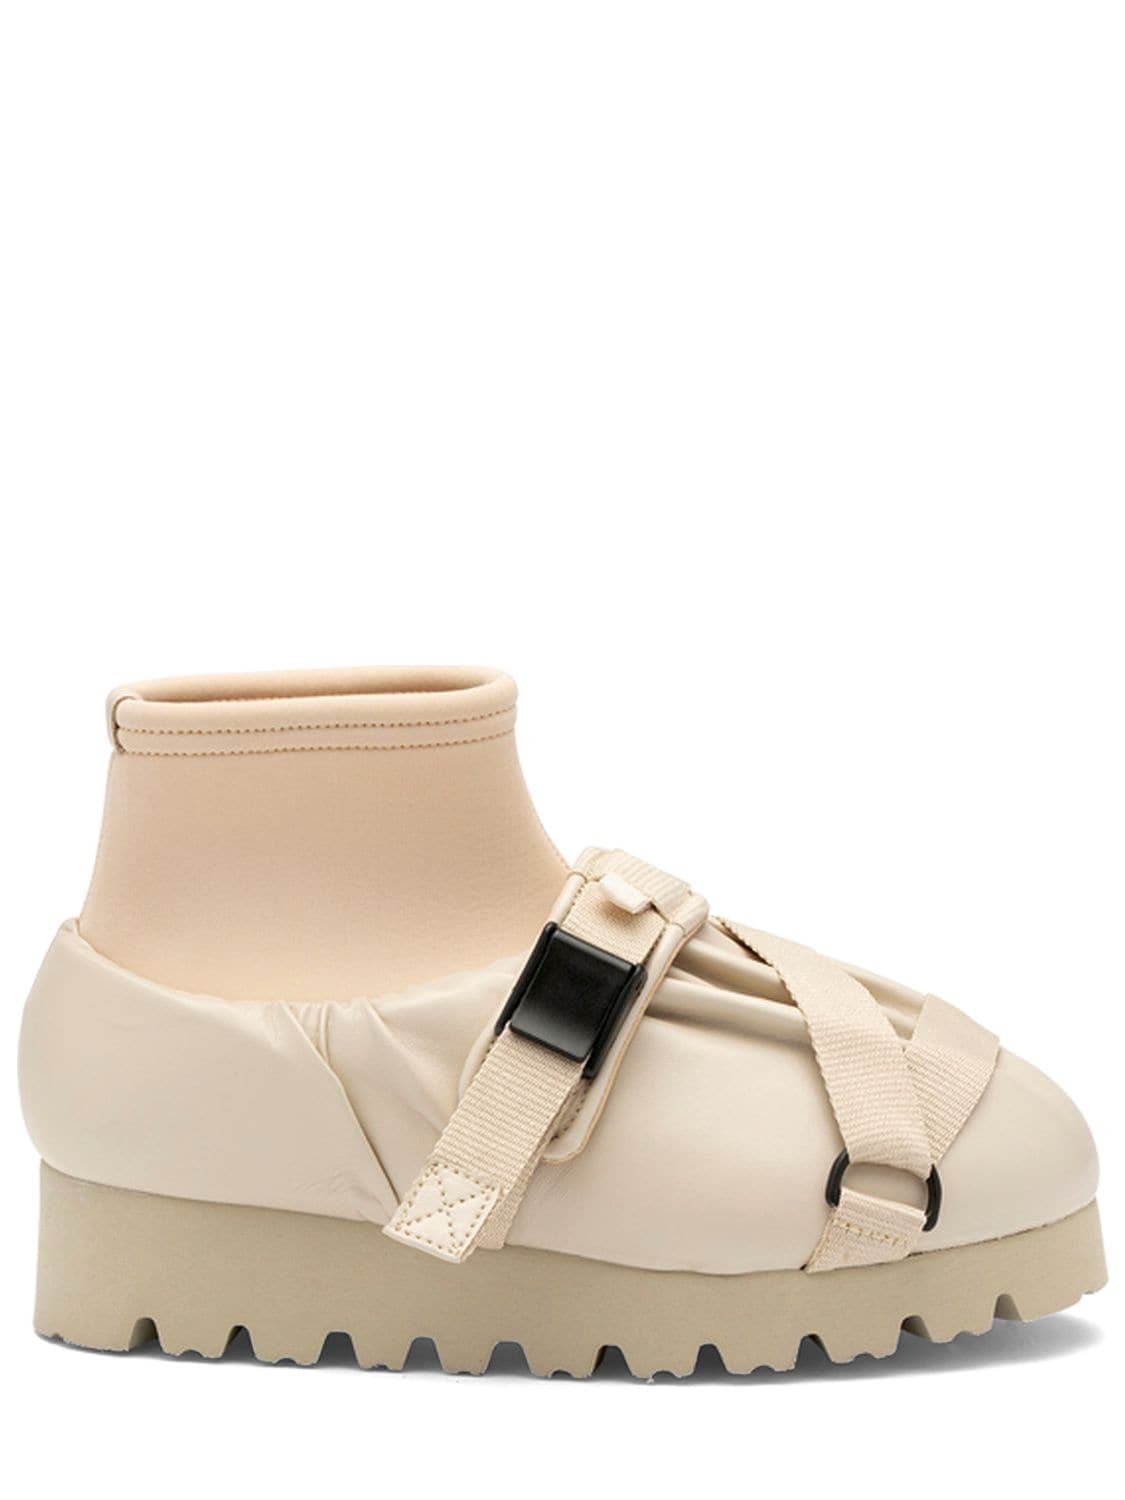 Yume Yume Camp High Faux Leather Shoes In Beige